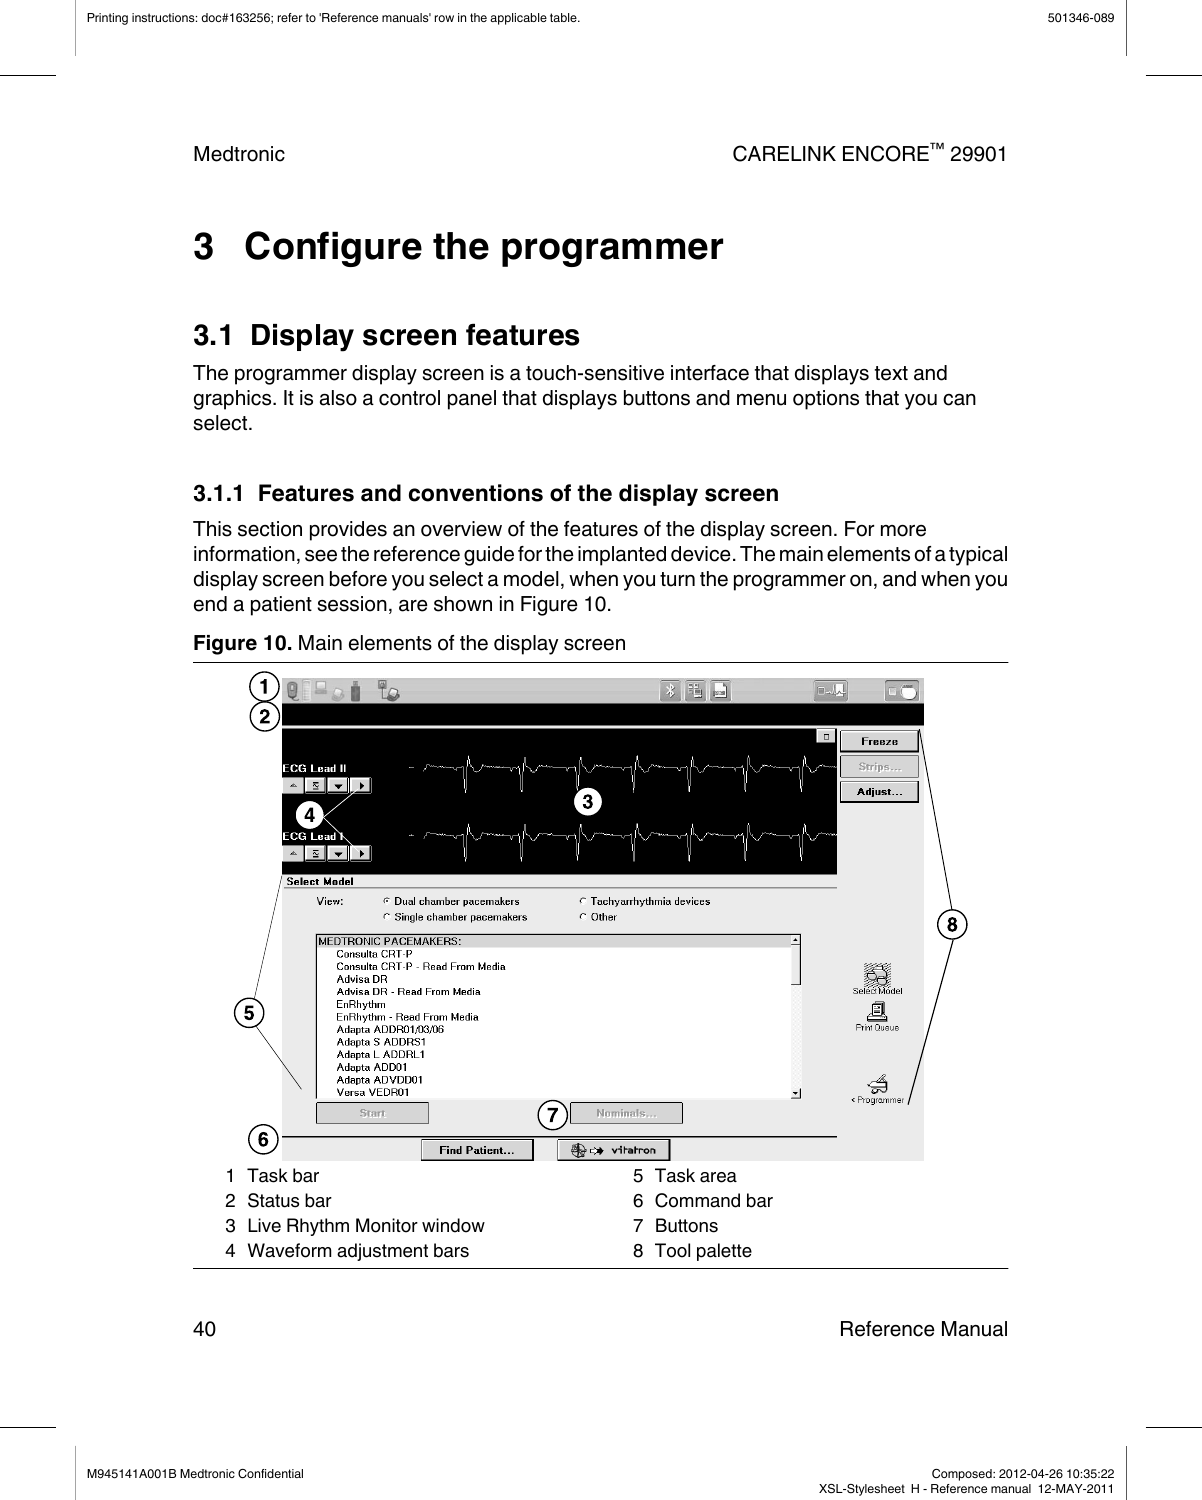 3   Configure the programmer3.1  Display screen featuresThe programmer display screen is a touch-sensitive interface that displays text andgraphics. It is also a control panel that displays buttons and menu options that you canselect.3.1.1  Features and conventions of the display screenThis section provides an overview of the features of the display screen. For moreinformation, see the reference guide for the implanted device. The main elements of a typicaldisplay screen before you select a model, when you turn the programmer on, and when youend a patient session, are shown in Figure 10.Figure 10. Main elements of the display screen1 Task bar2 Status bar3 Live Rhythm Monitor window4 Waveform adjustment bars5 Task area6 Command bar7 Buttons8 Tool palettePrinting instructions: doc#163256; refer to &apos;Reference manuals&apos; row in the applicable table. 501346-089Medtronic CARELINK ENCORE™ 2990140 Reference ManualM945141A001B Medtronic Confidential   Composed: 2012-04-26 10:35:22XSL-Stylesheet  H - Reference manual  12-MAY-2011